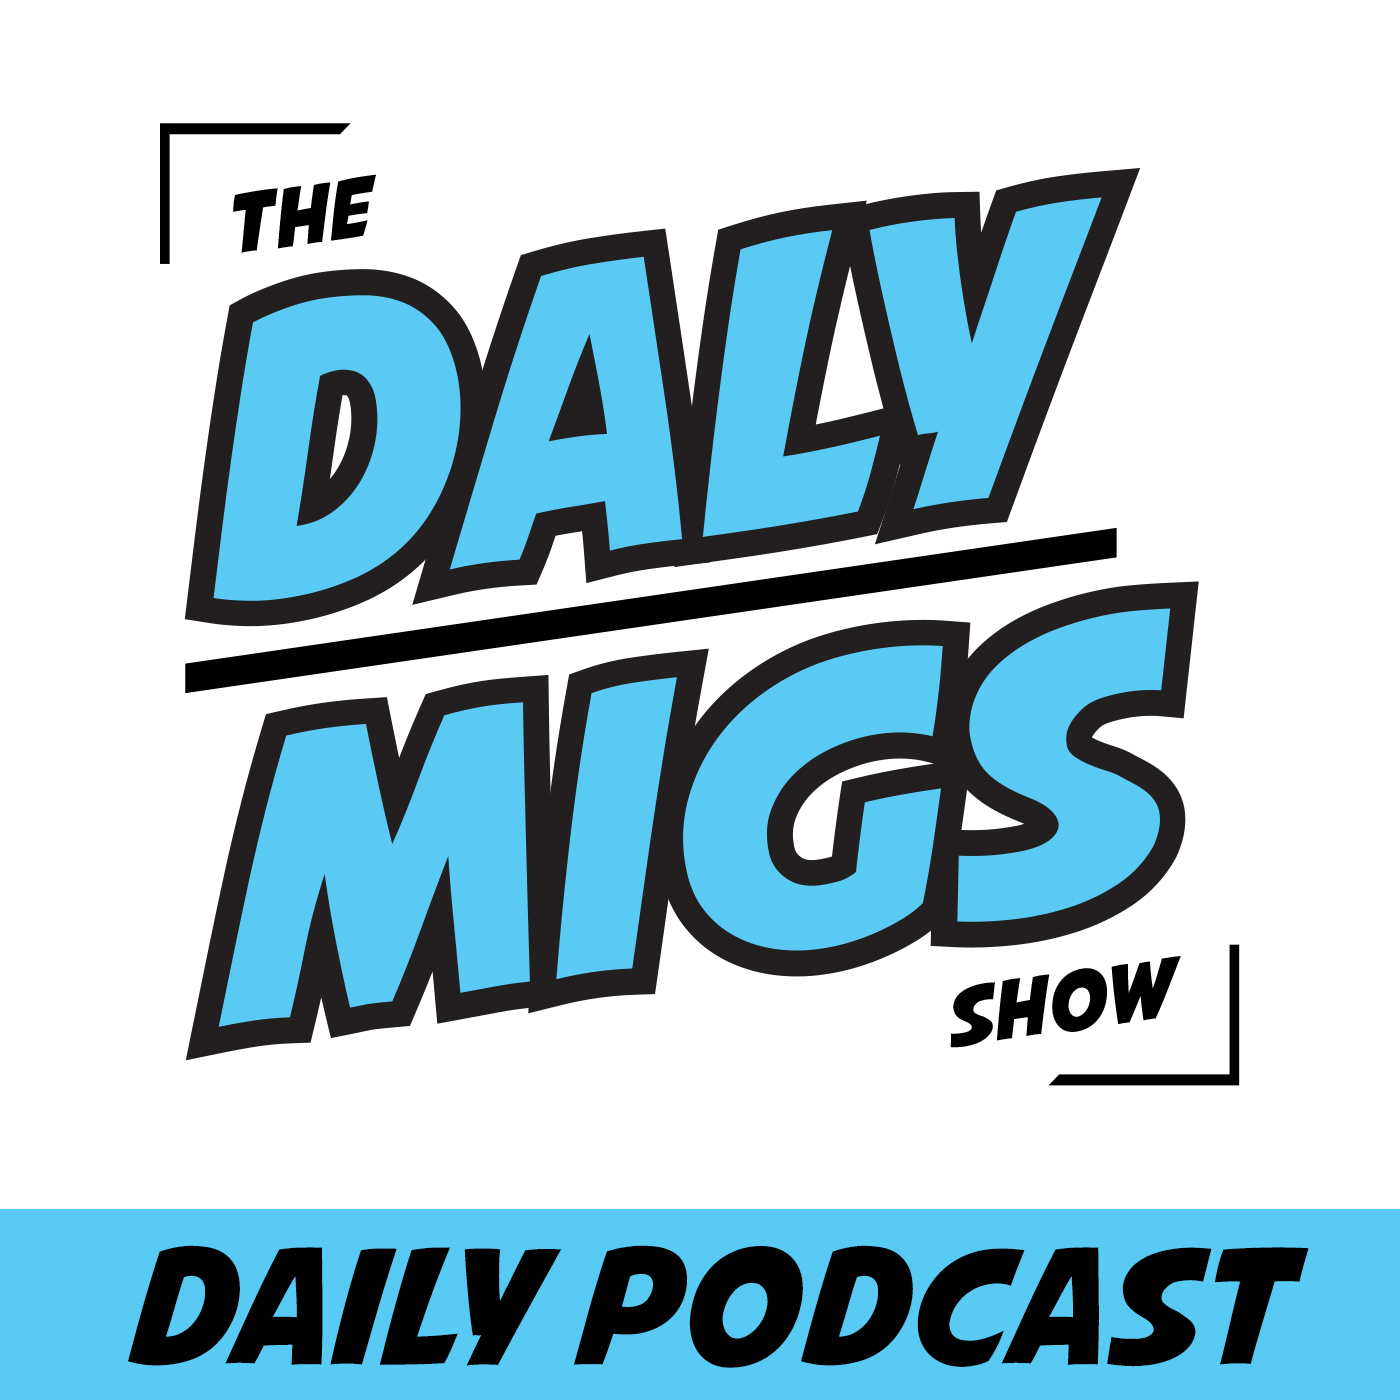 Daily Podcast pt. 4 - "Jon Ryan breaks history with the Pickles"